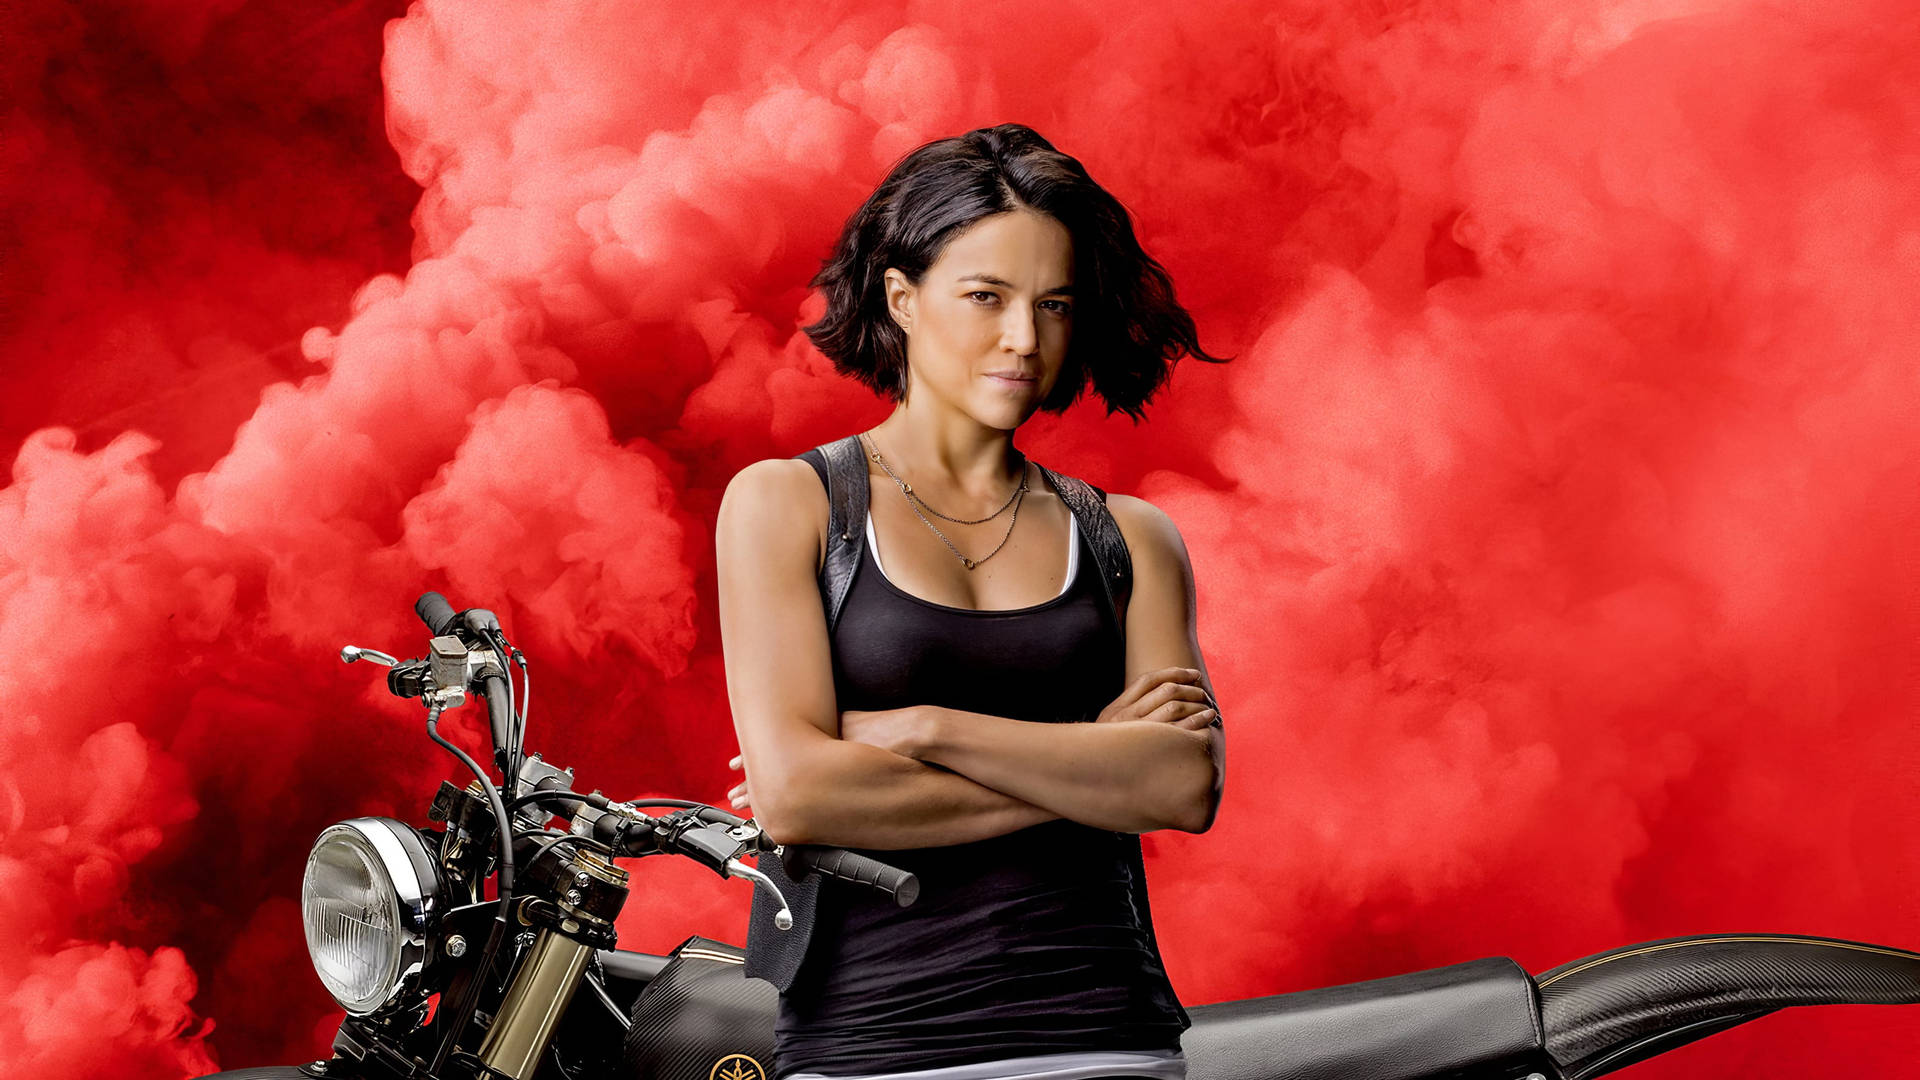 Letty Ortiz, the fearless racer from the Fast and Furious series, embodied in a captivating desktop image. Wallpaper